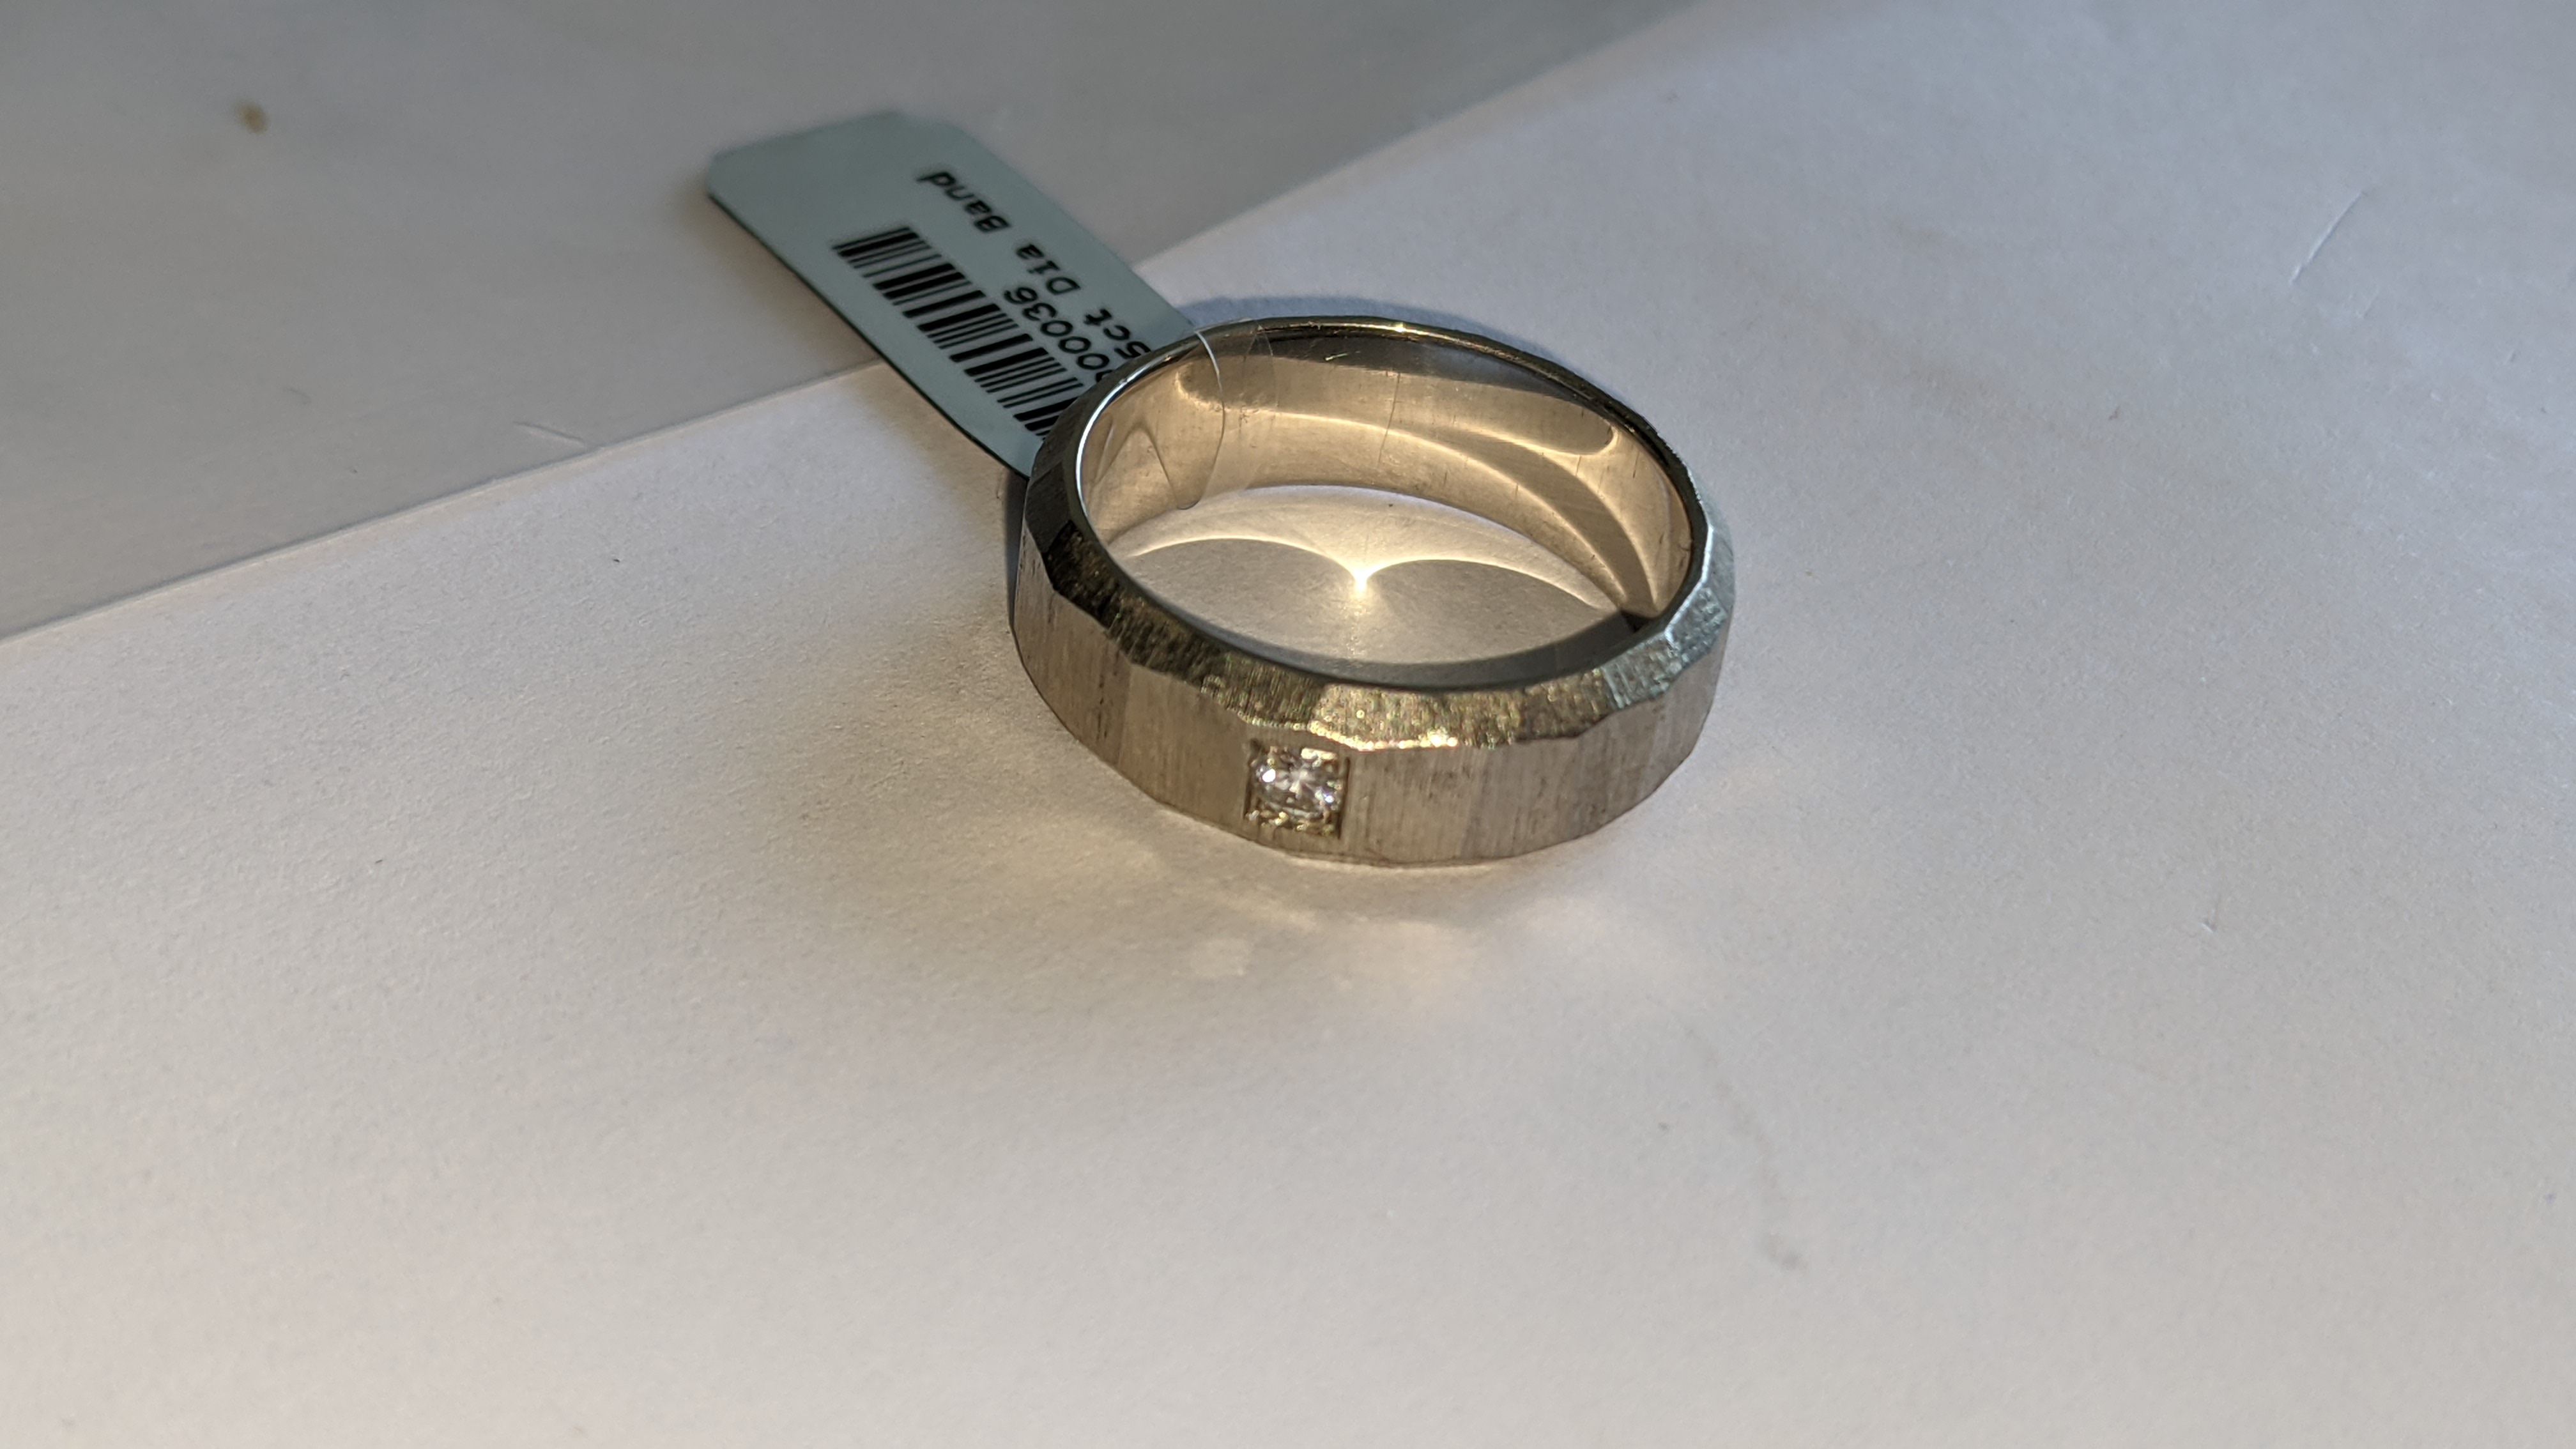 Platinum 950 unusually faceted Palladium 950 ring with single diamond weighing 0.05ct. RRP £1,220 - Image 8 of 15